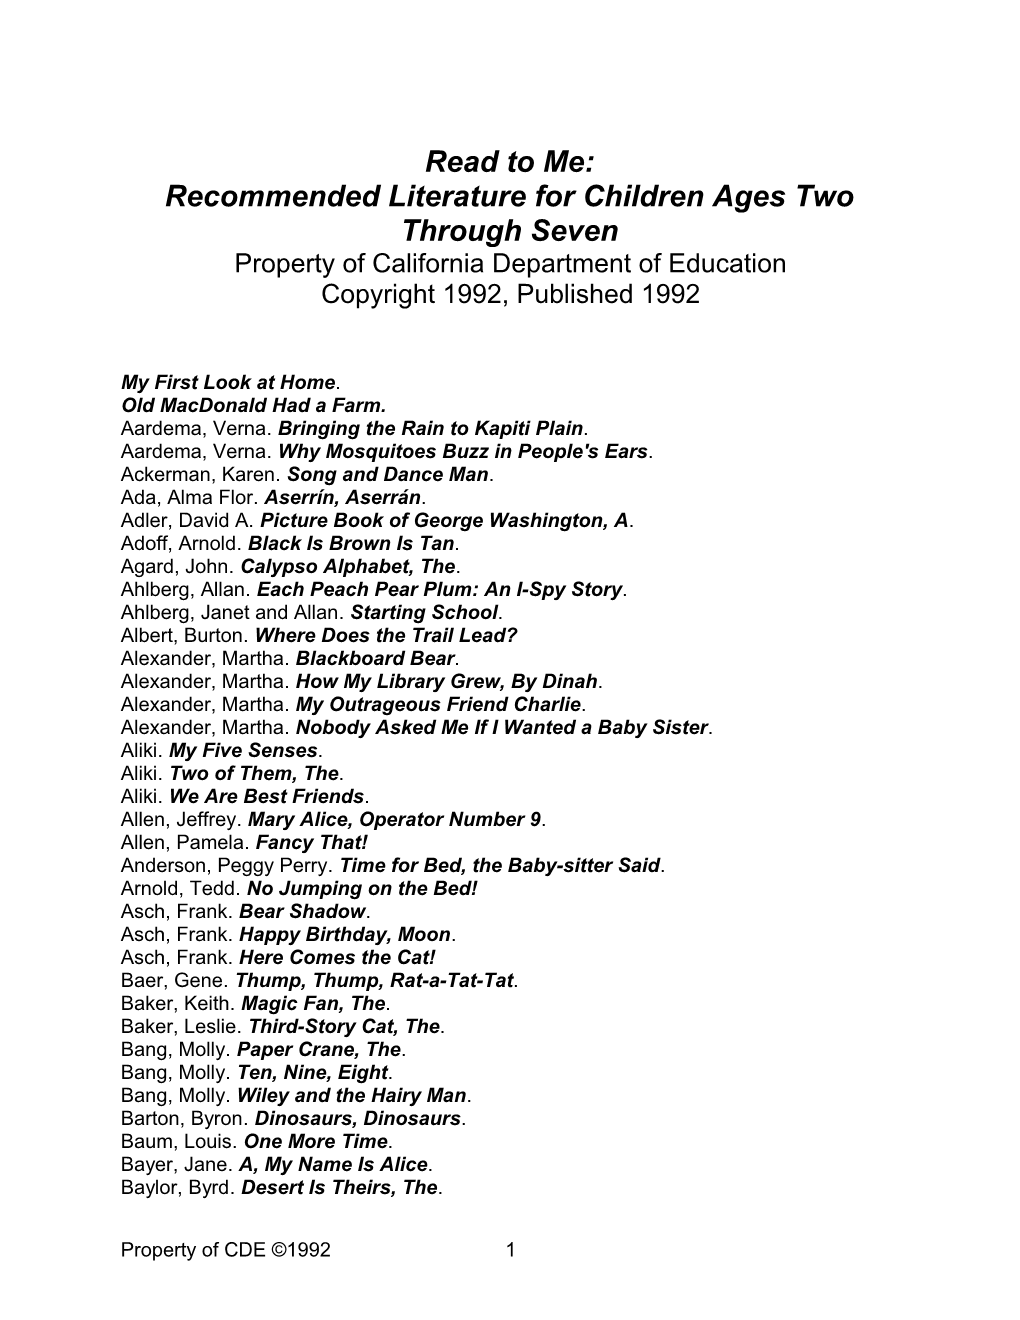 List7: Read to Me - Recommended Literature (CA Dept of Education)